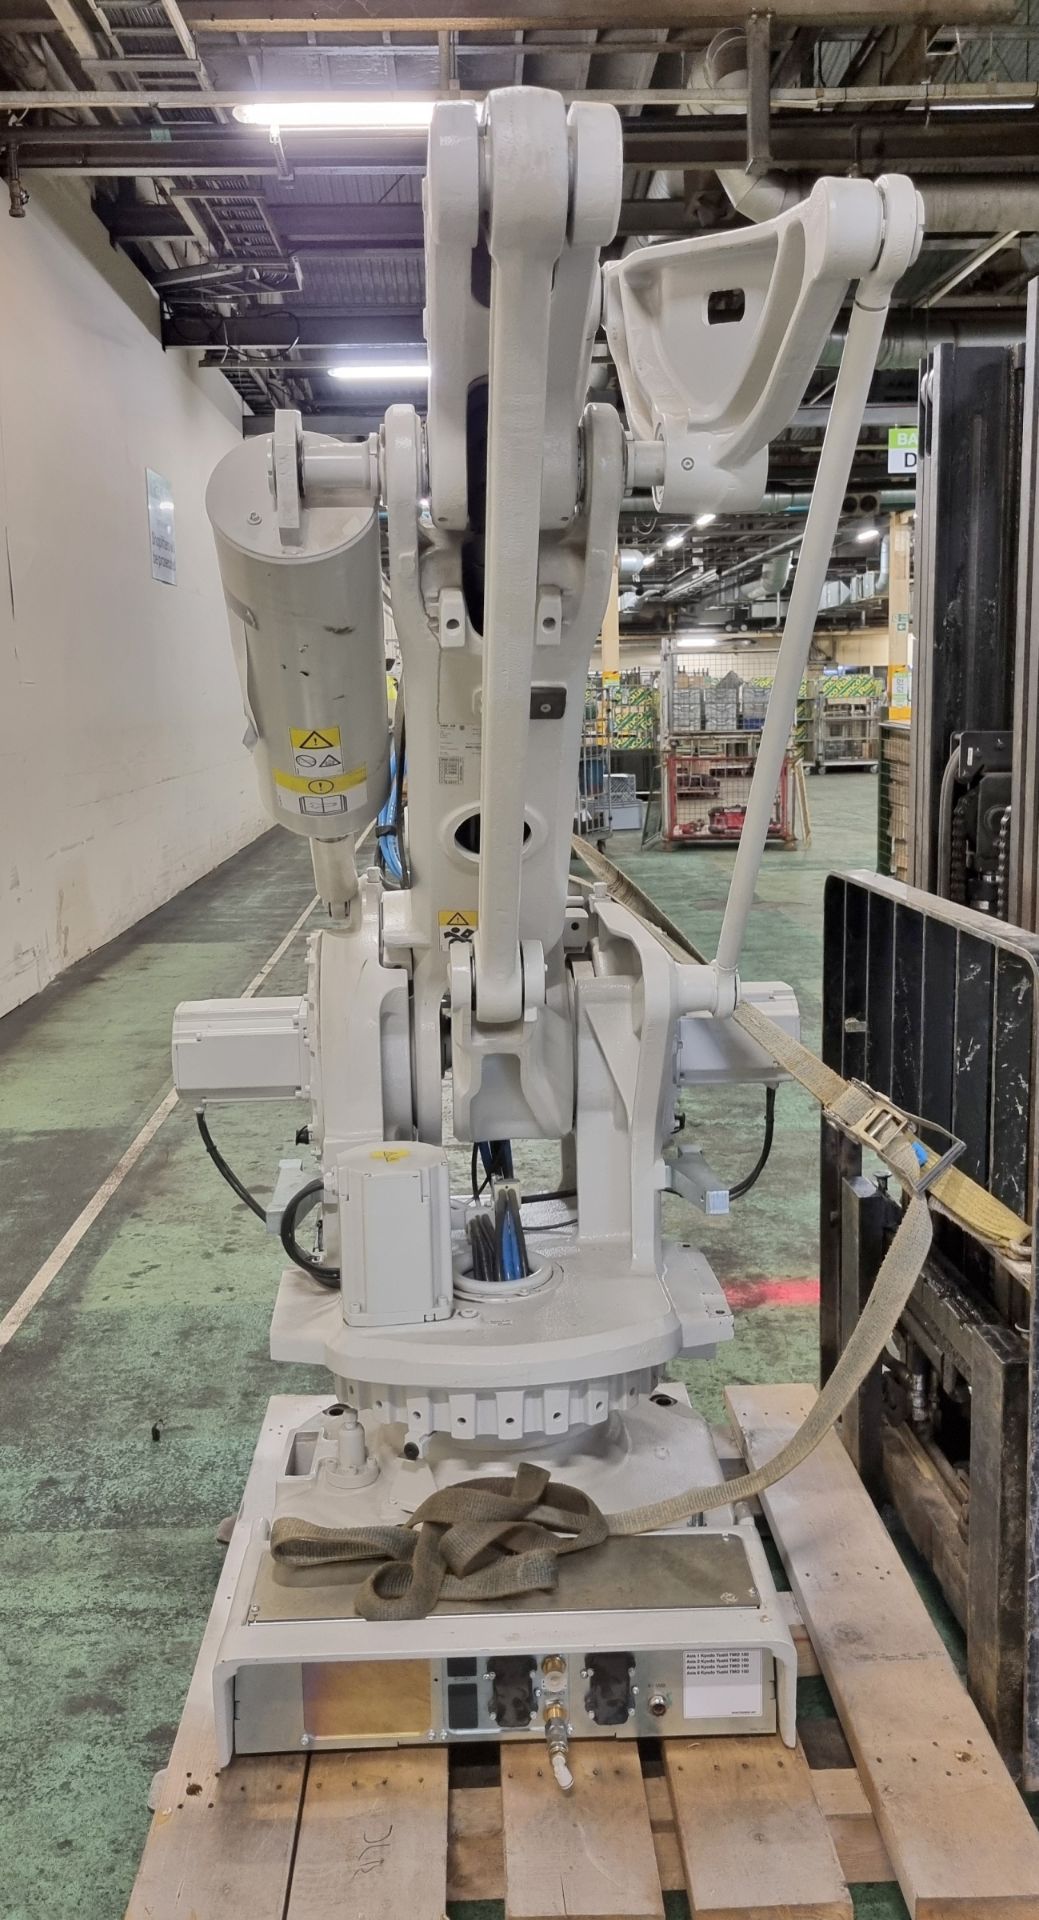 ABB AB IRB 660 4 axis articulated robot arm with ABB IRC5 Single robot control panel - Image 14 of 55